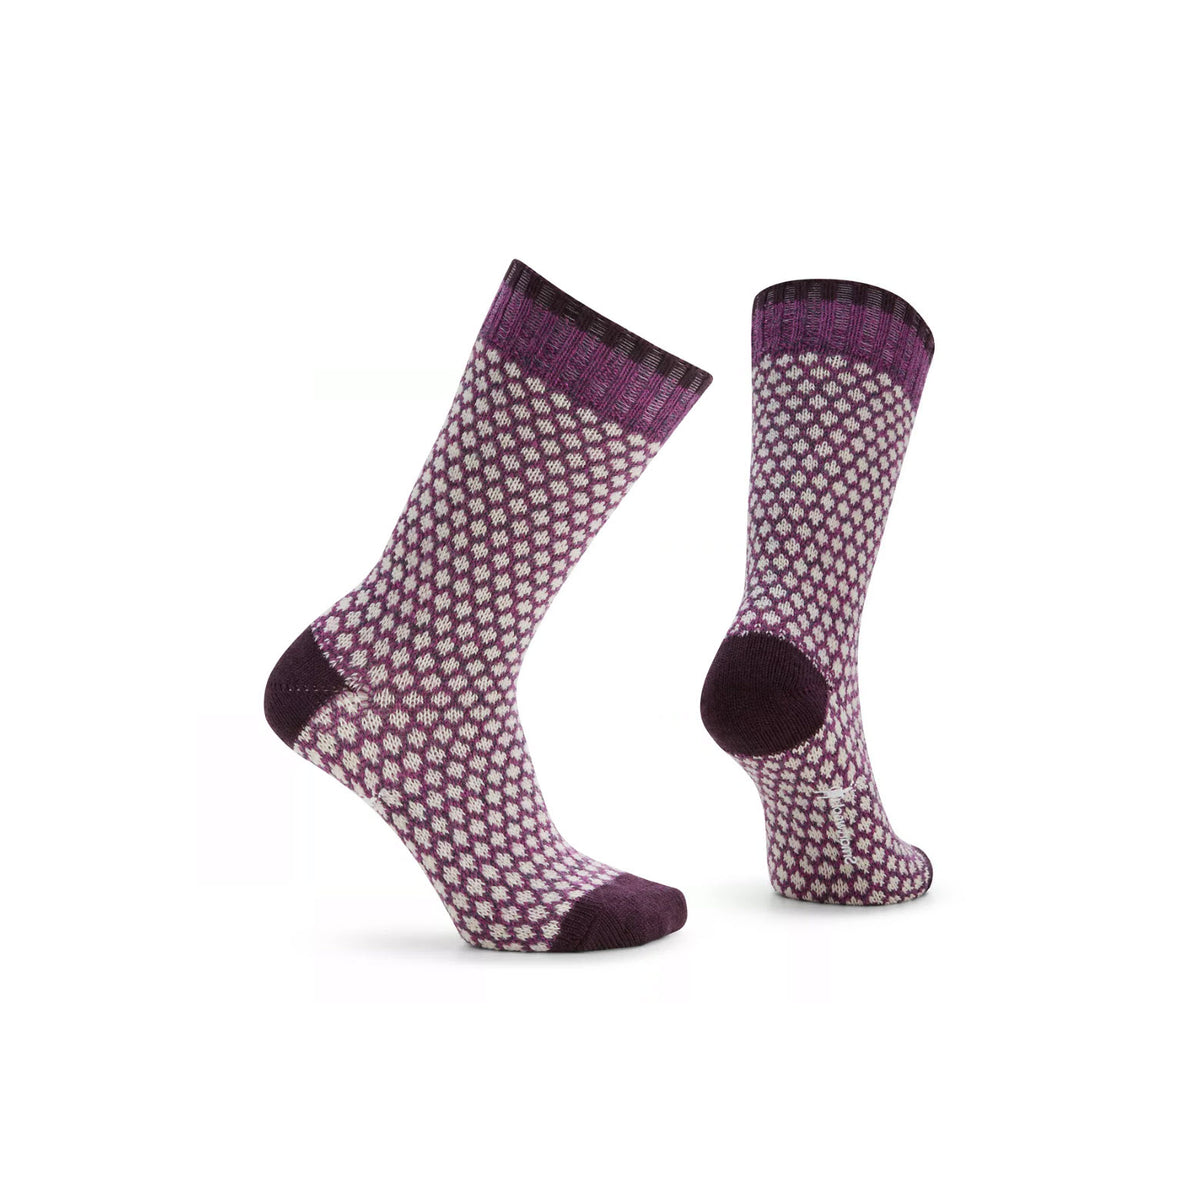 A pair of Smartwool Popcorn Crew Socks Polka Dot Twilight Blue - Womens standing upright against a white background.